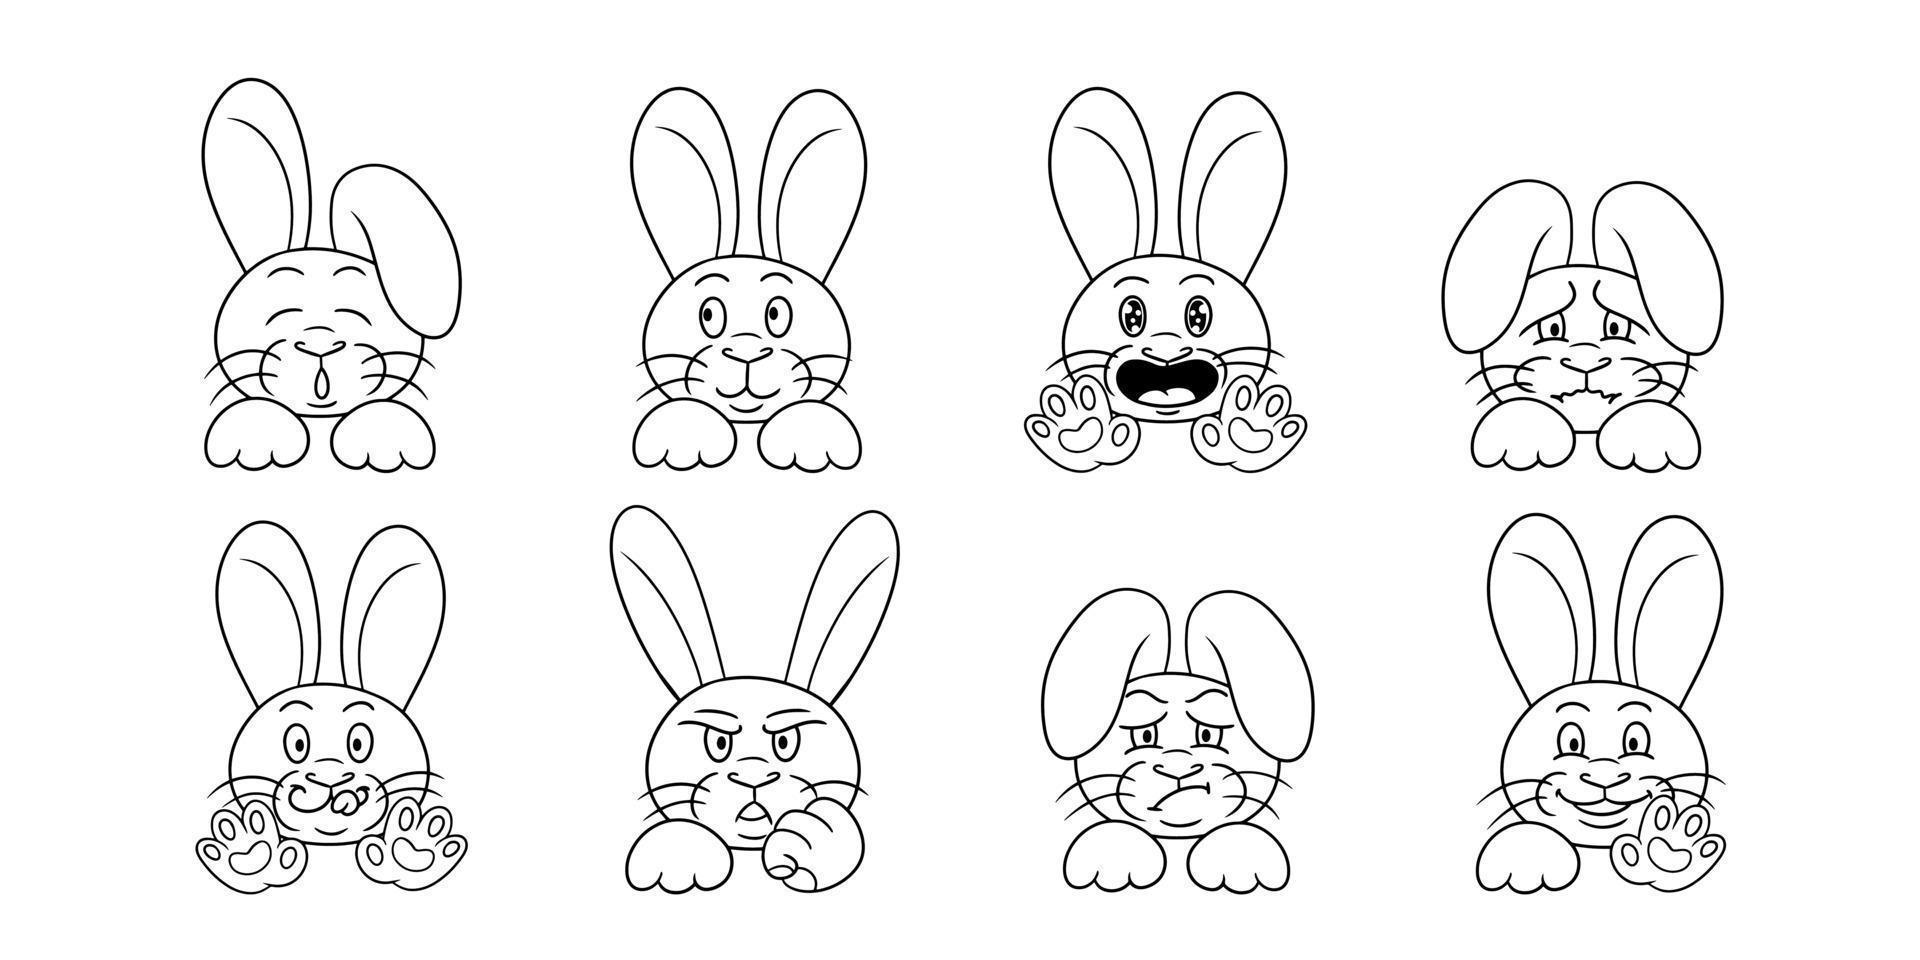 Large Collection of monochrome characters, cute little rabbits in cartoon style, Vector illustration on white background